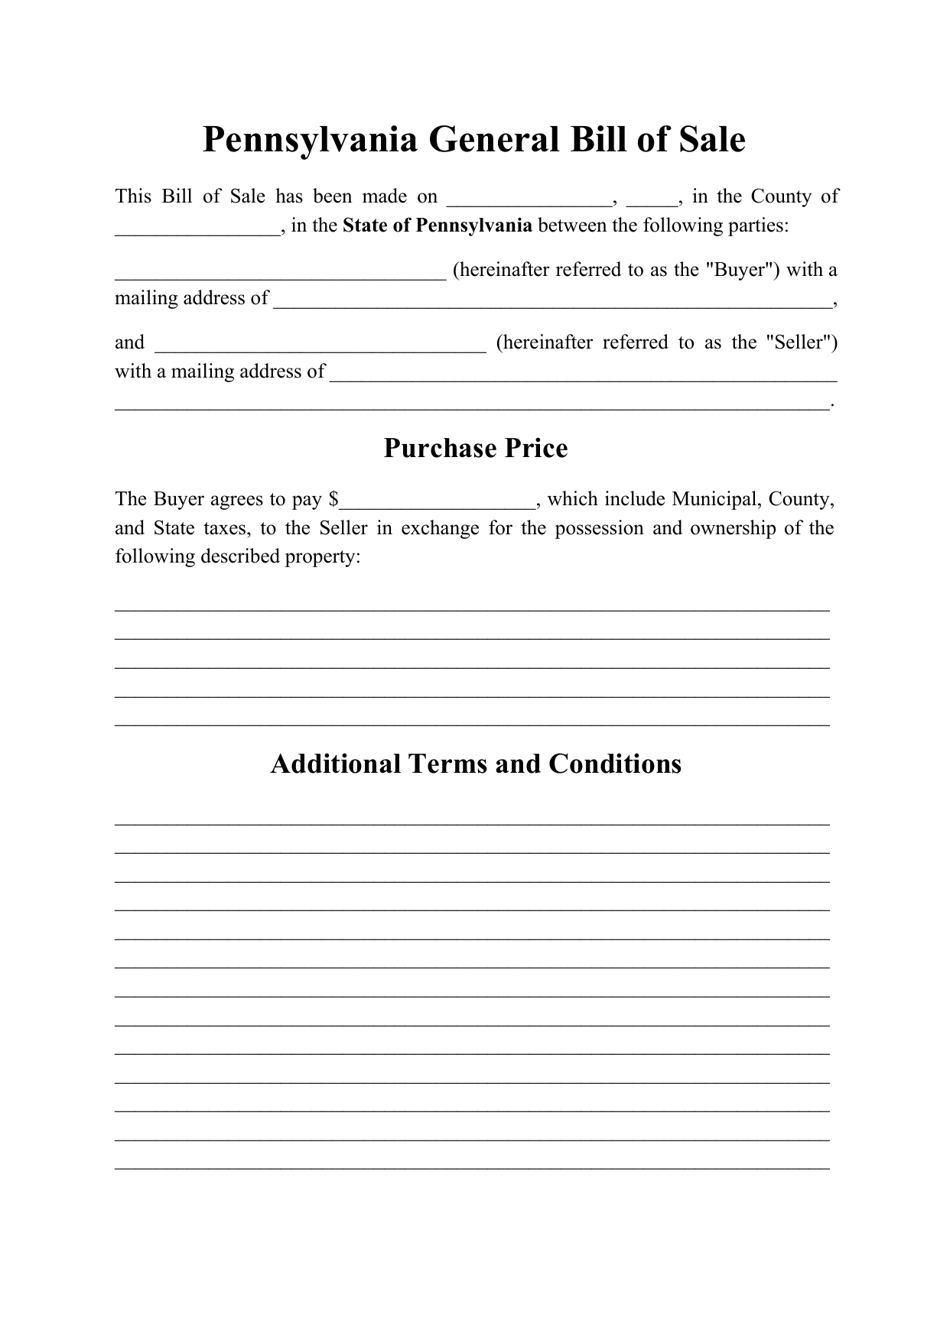 Generic Bill of Sale Form - Pennsylvania, Page 1